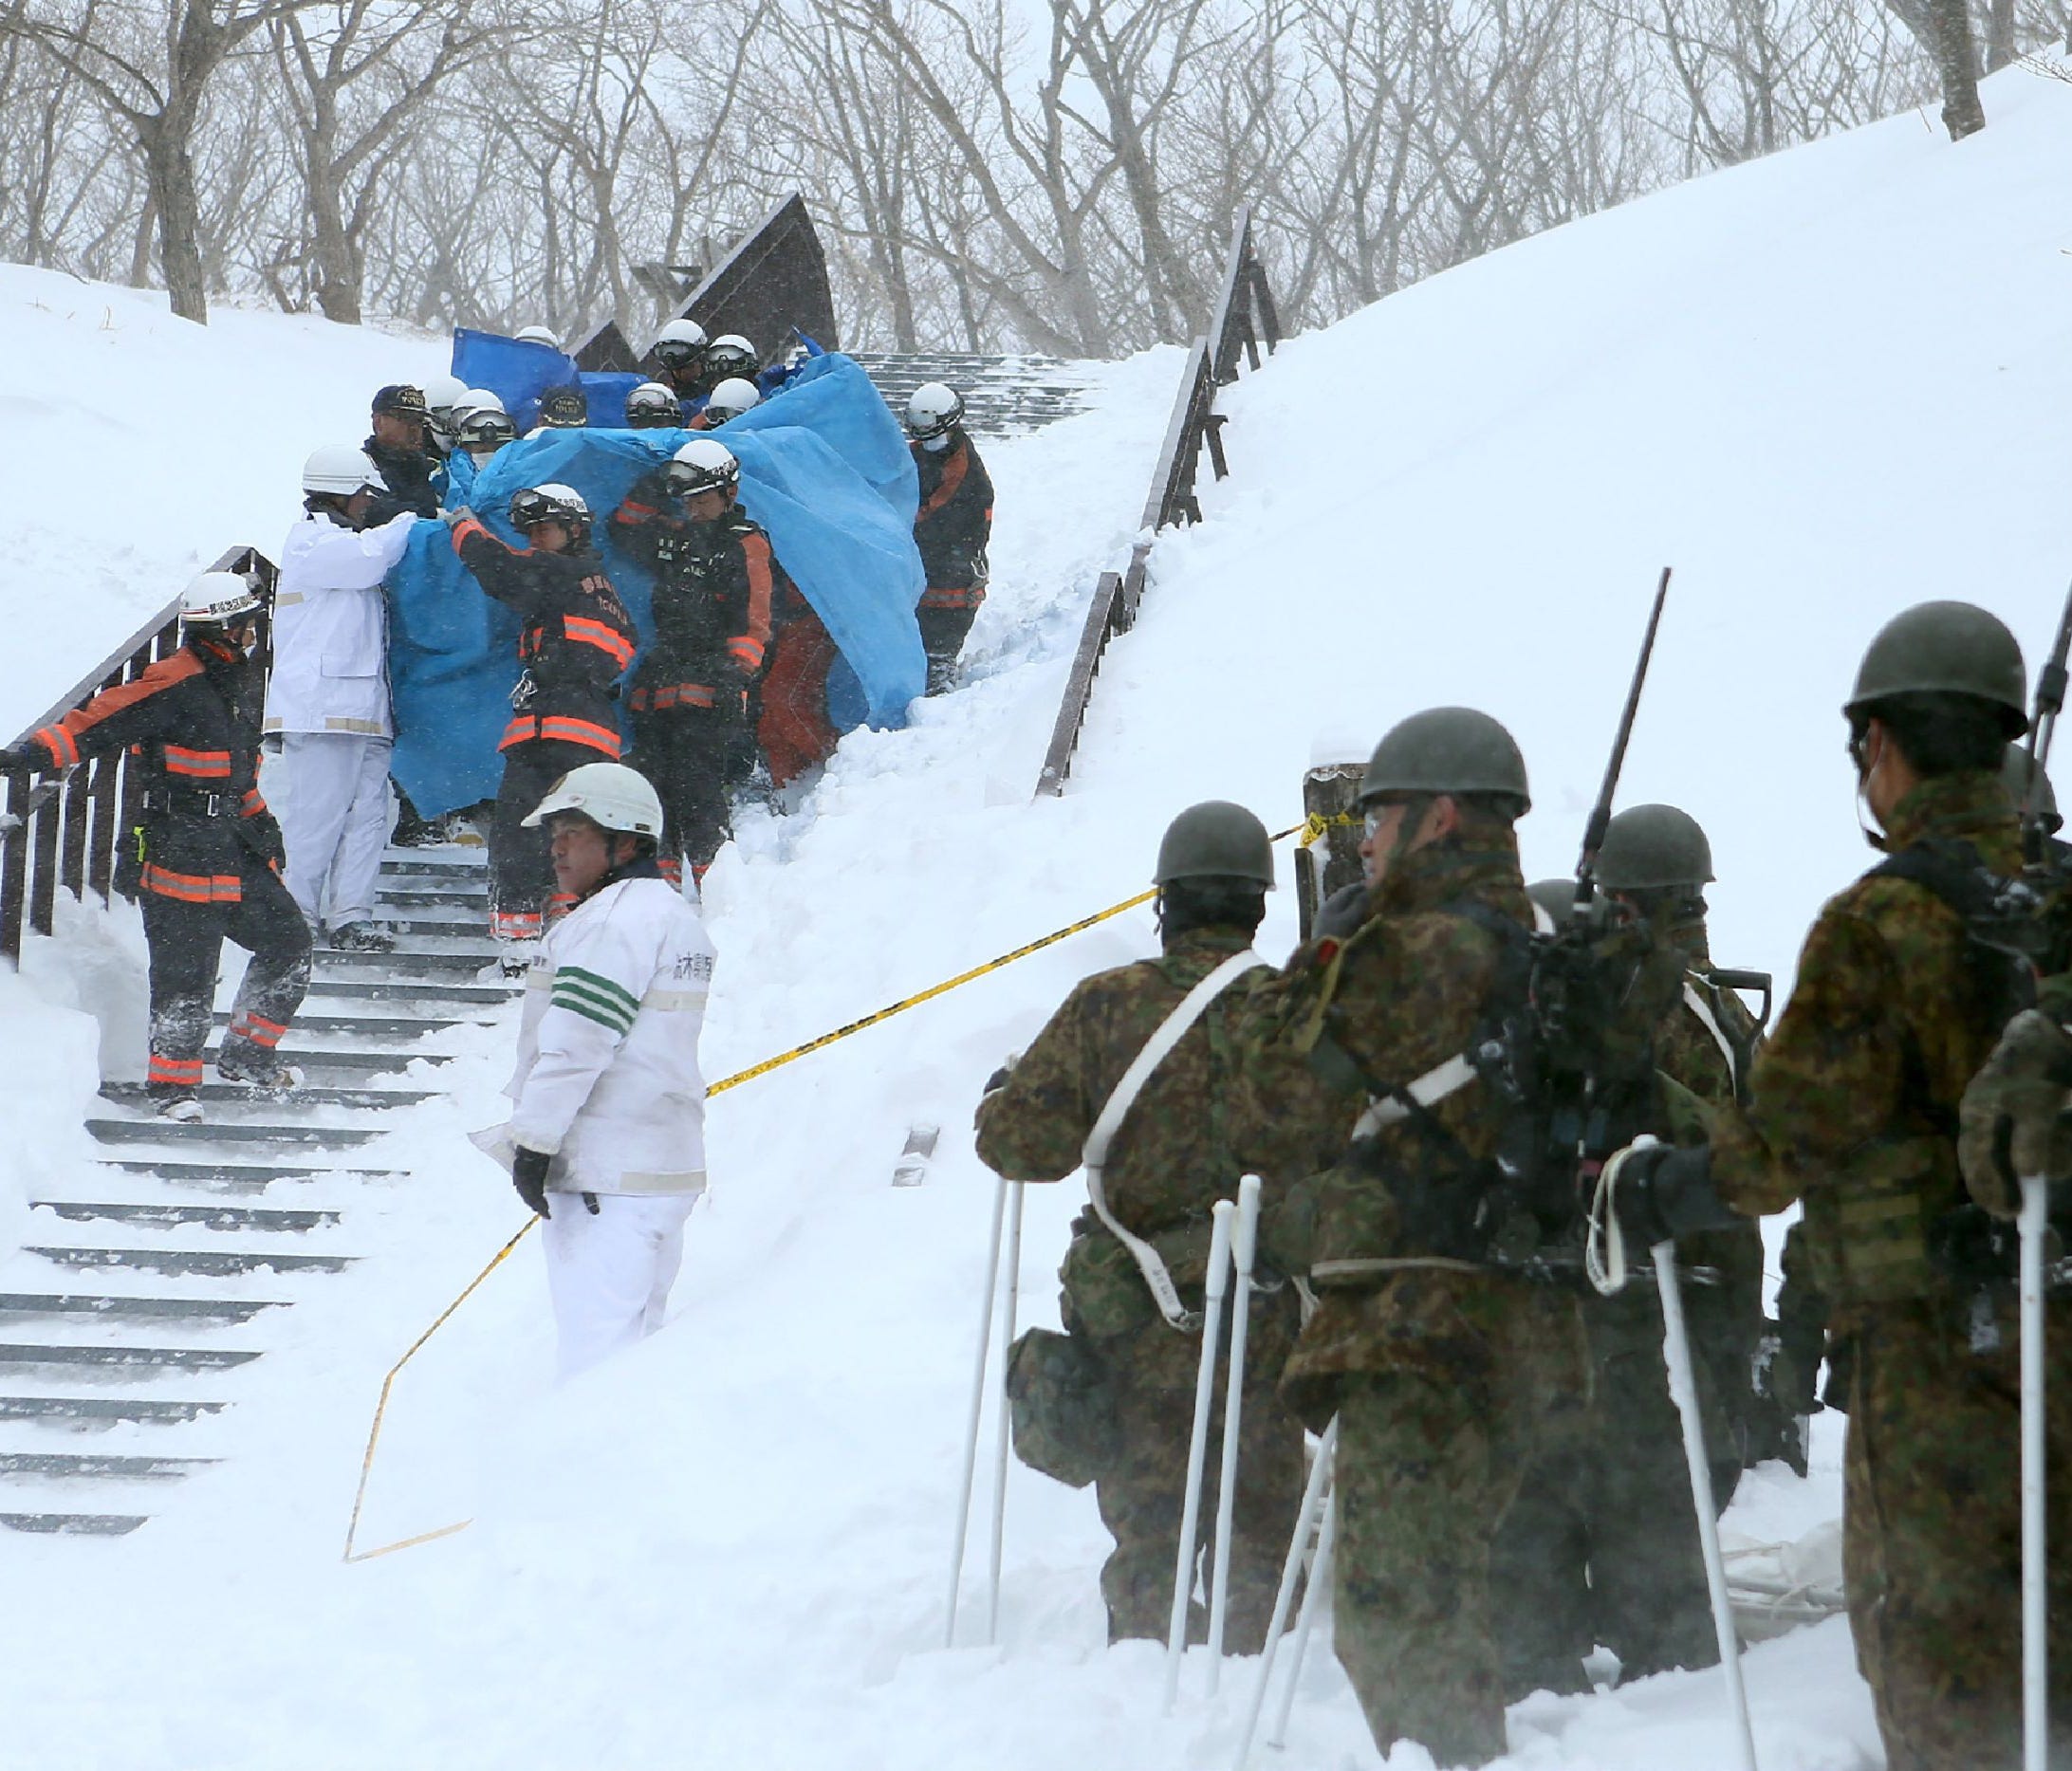 Firefighters carry a survivor they rescued from the site of an avalanche in Nasu town, Tochigi prefecture on March 27, 2017.